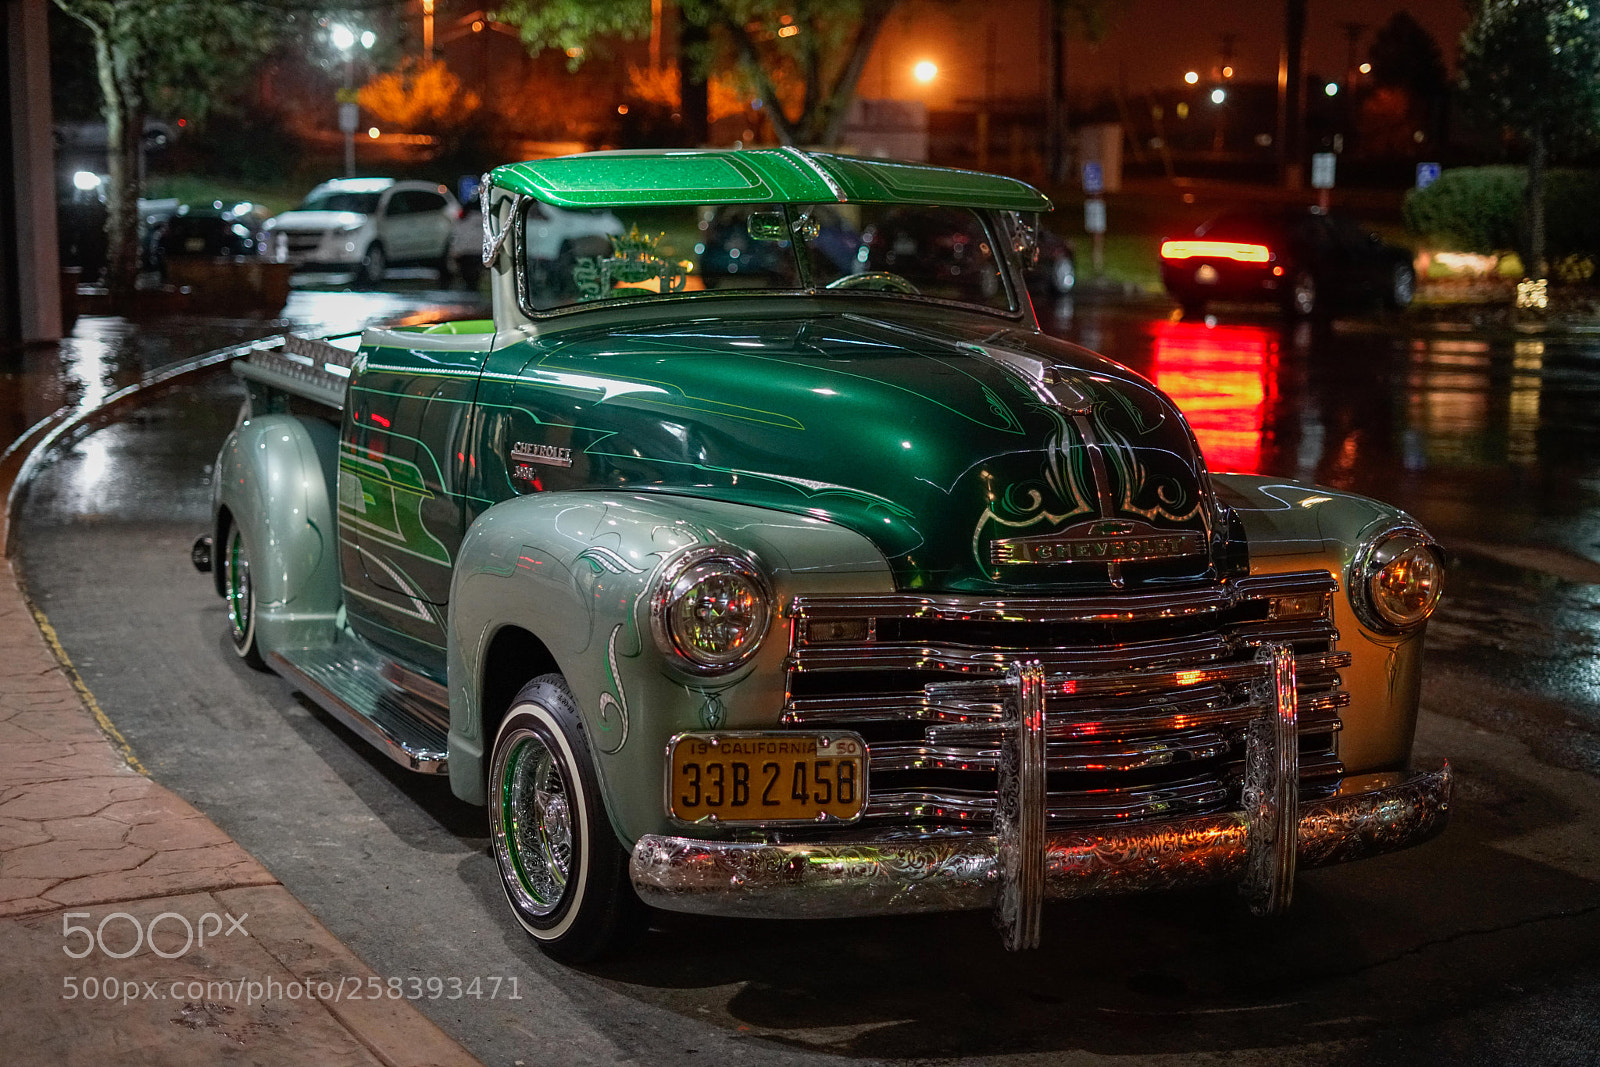 Sony a7R II sample photo. Old green chevrolet photography